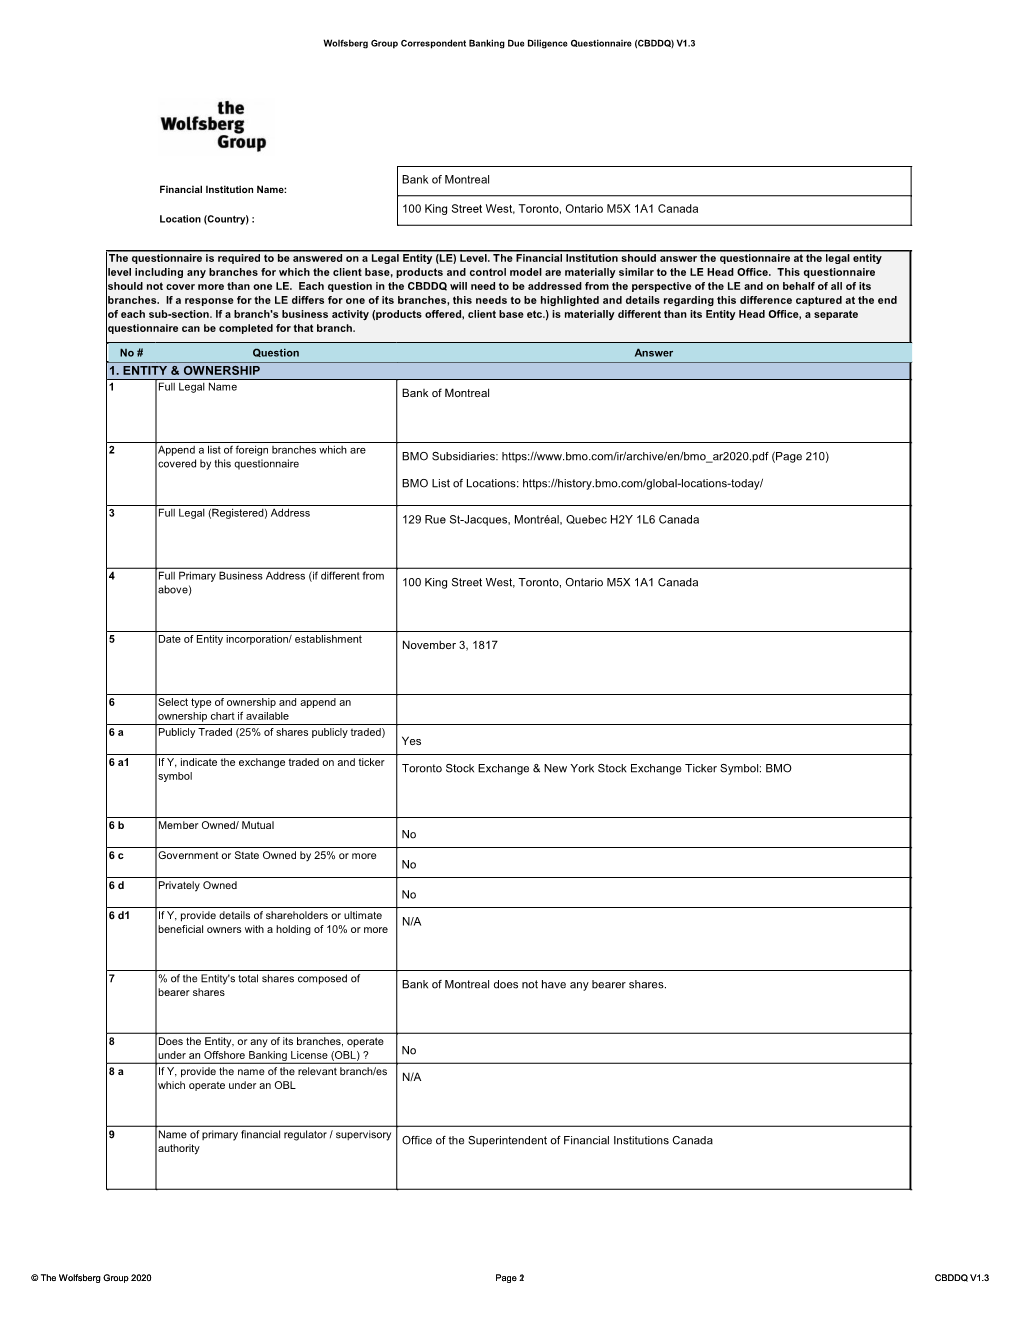 Wolfsberg Group Correspondent Banking Due Diligence Questionnaire (CBDDQ) V1.3